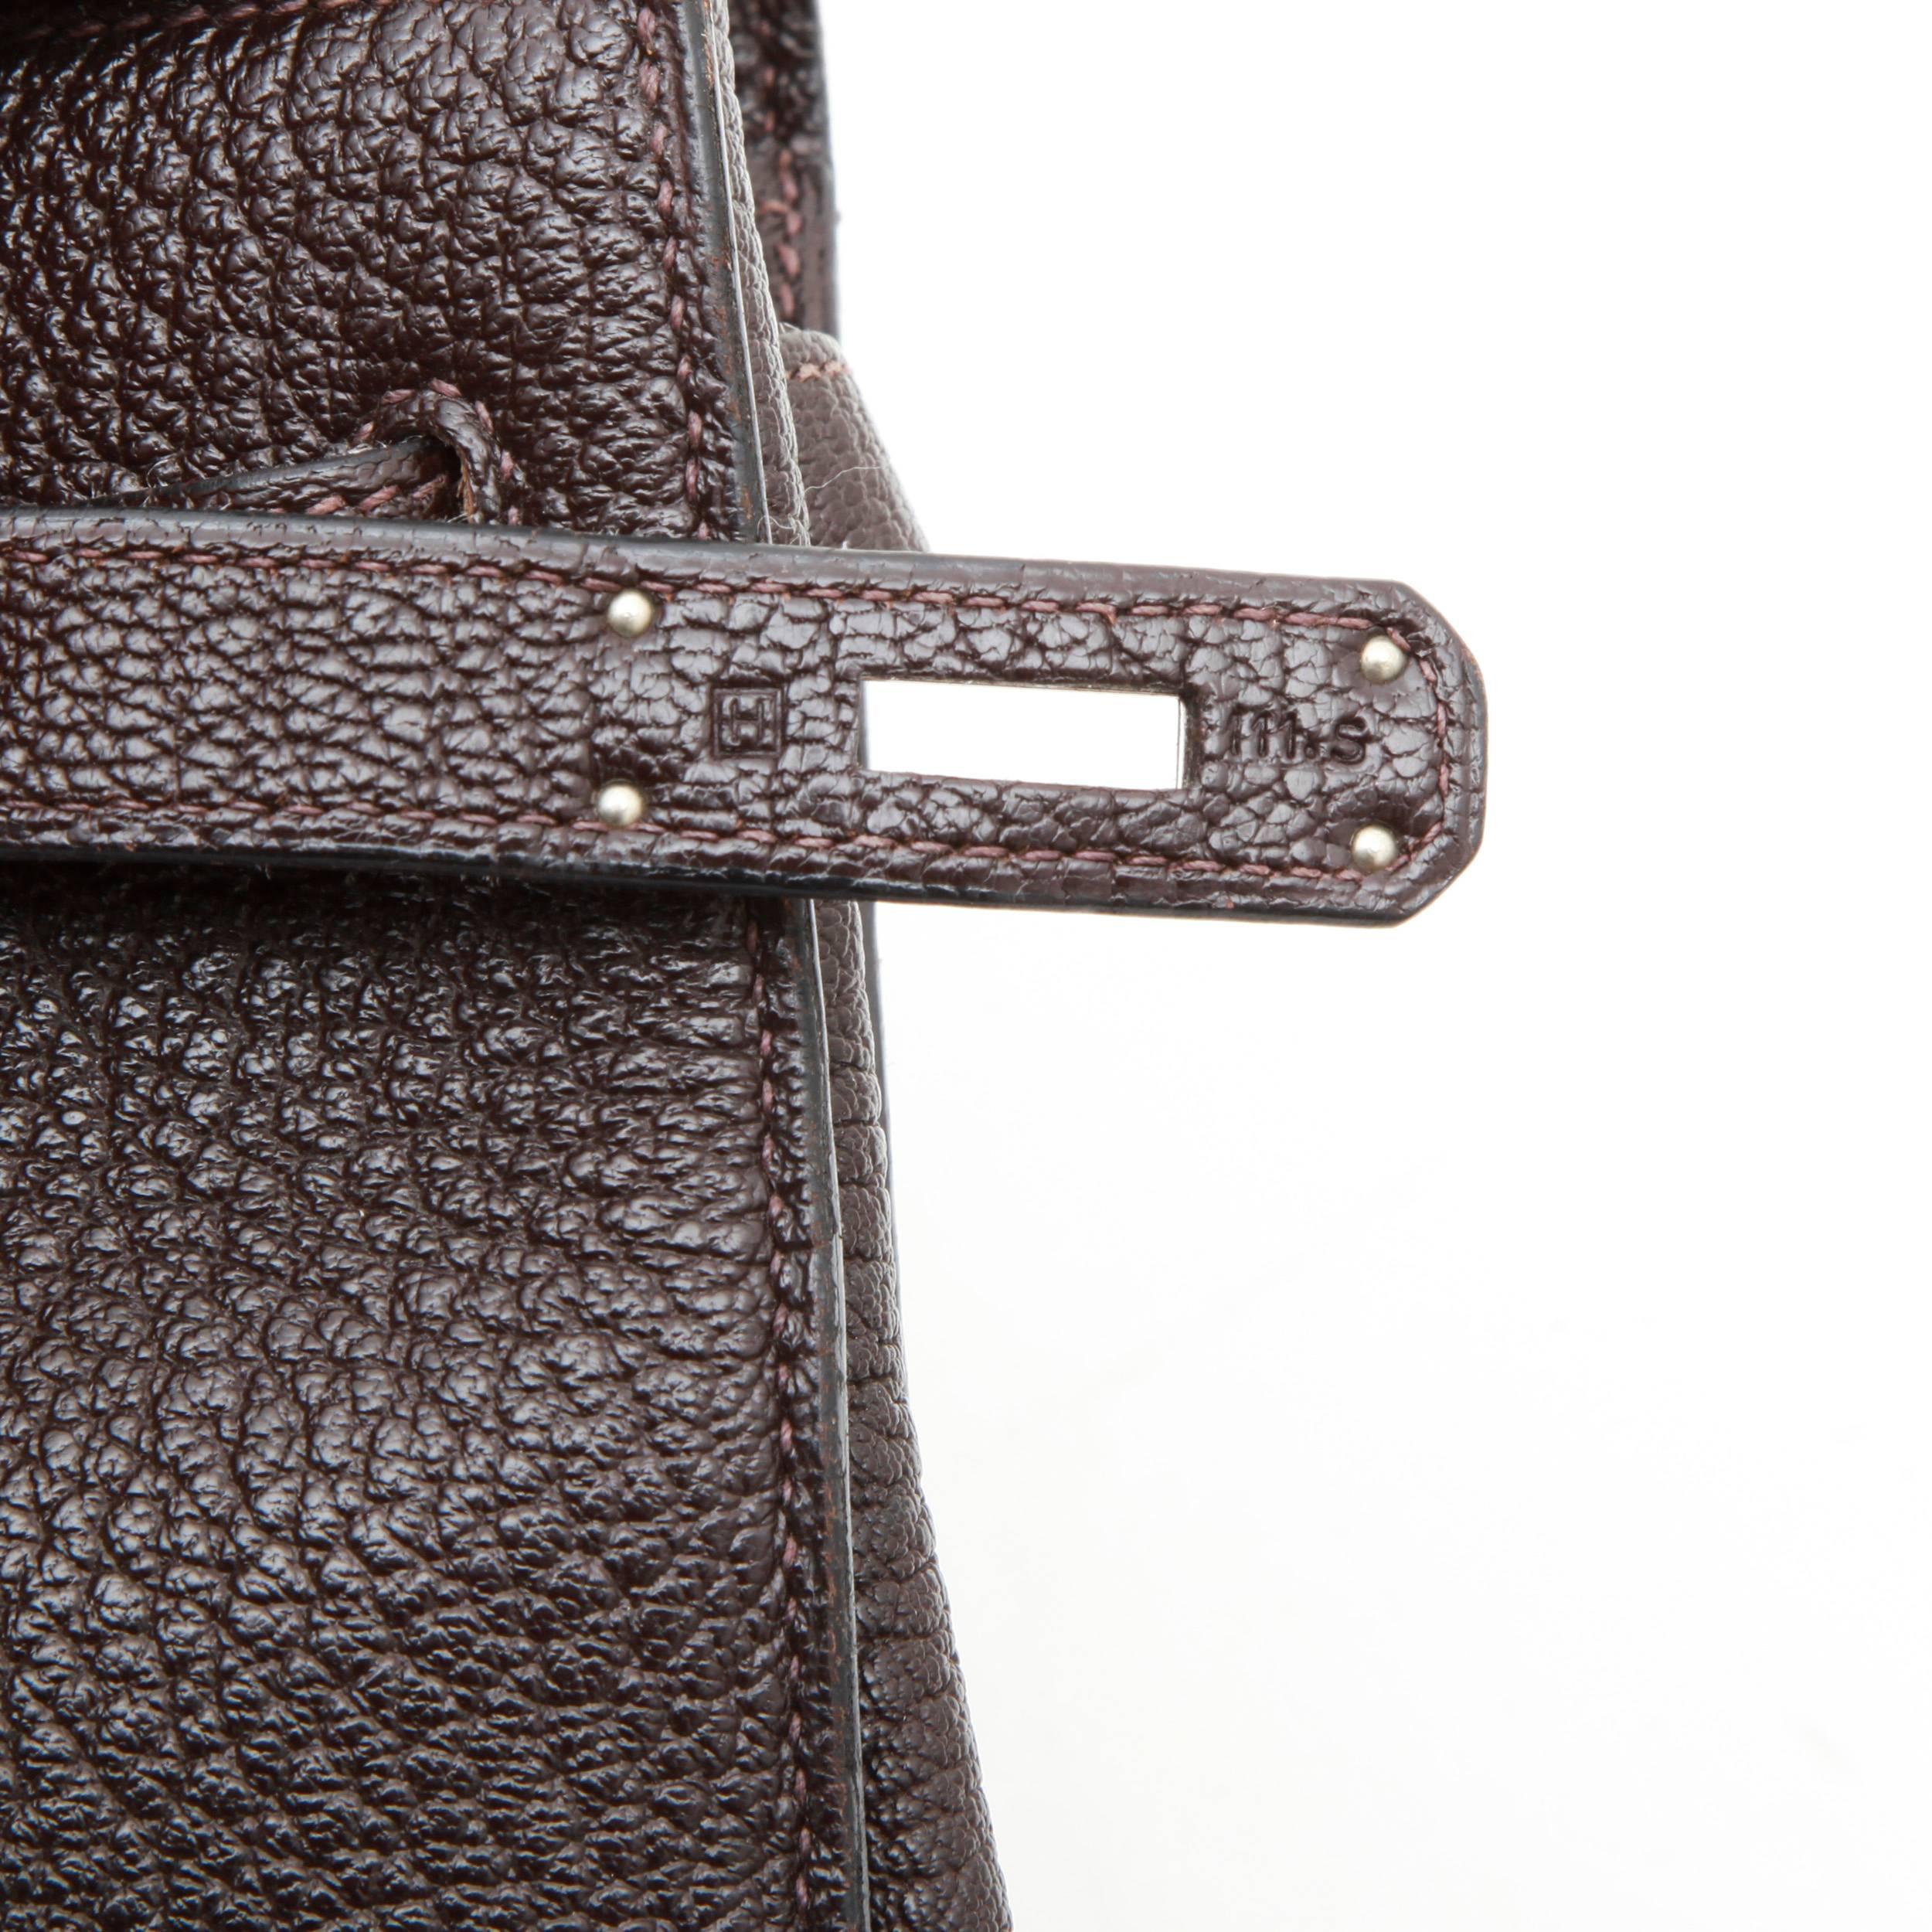 Hermes Kelly II 35 in Brown Grained Leather with Saddle Stitching 3